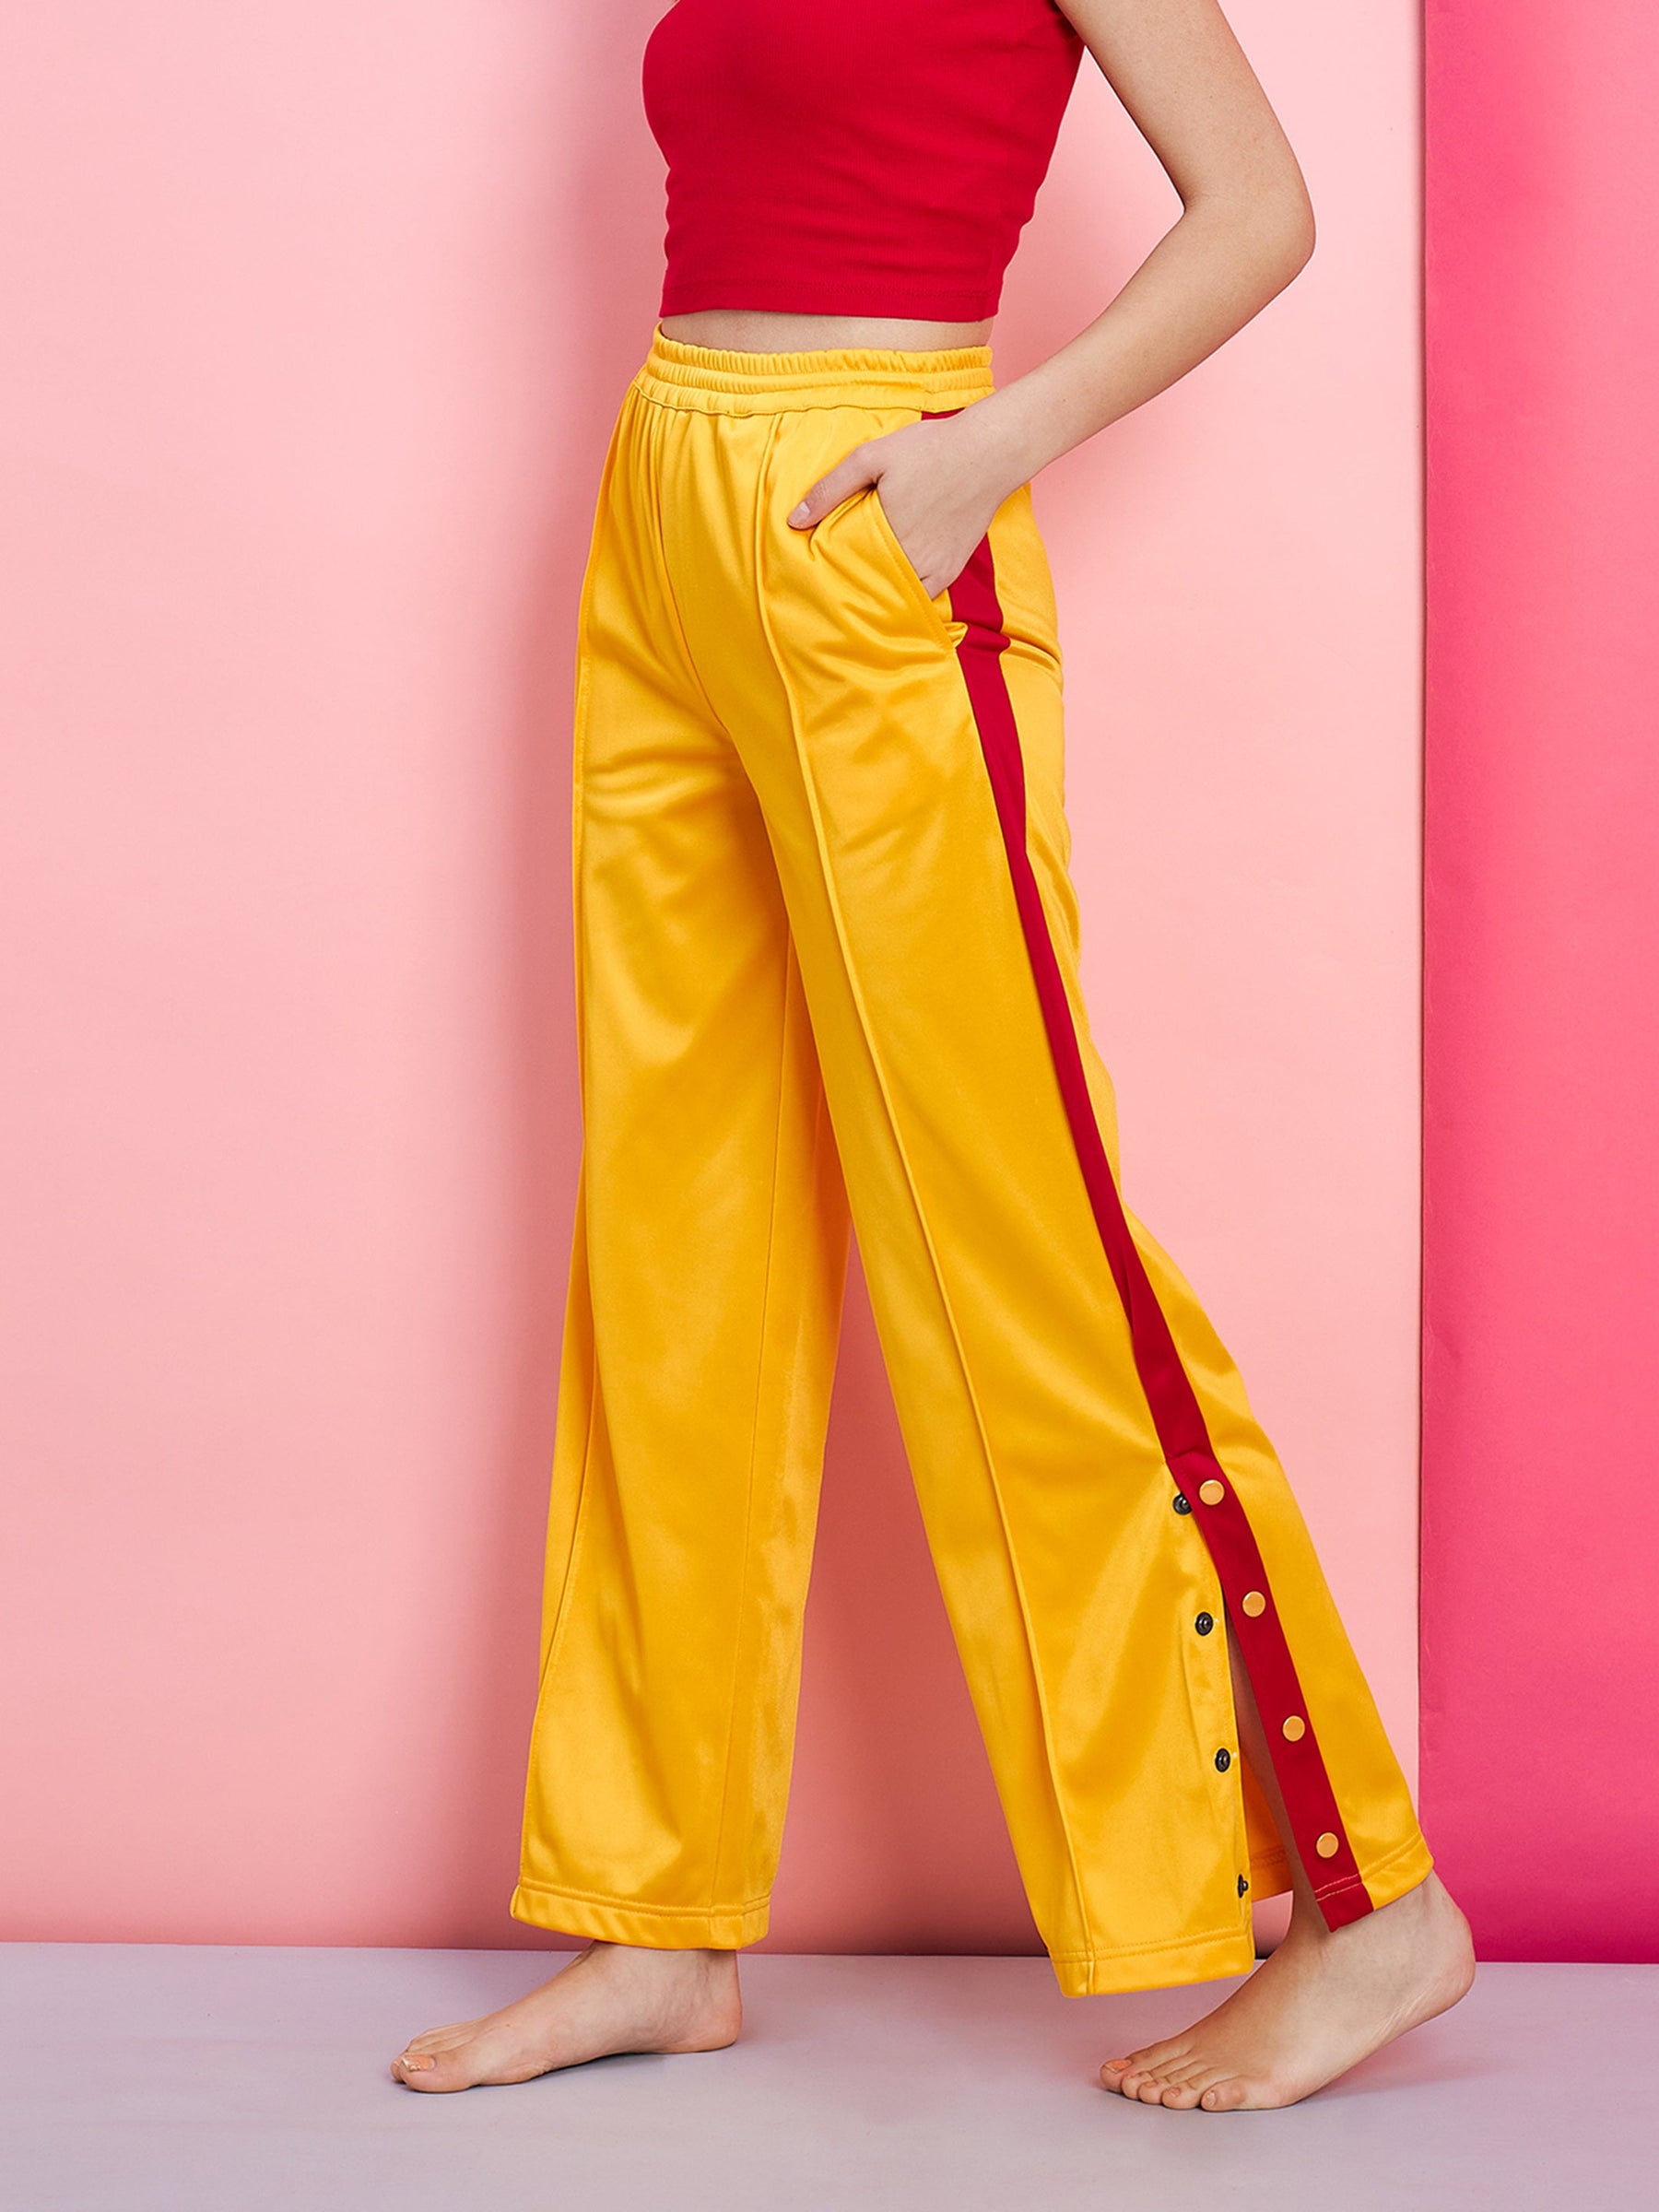 WANYNG Casual Pants Women's Wide Leg Pants High Elastic Waisted In The Back  Business Work Trousers Long Straight Suit Pants For Summer Yellow -  Walmart.com